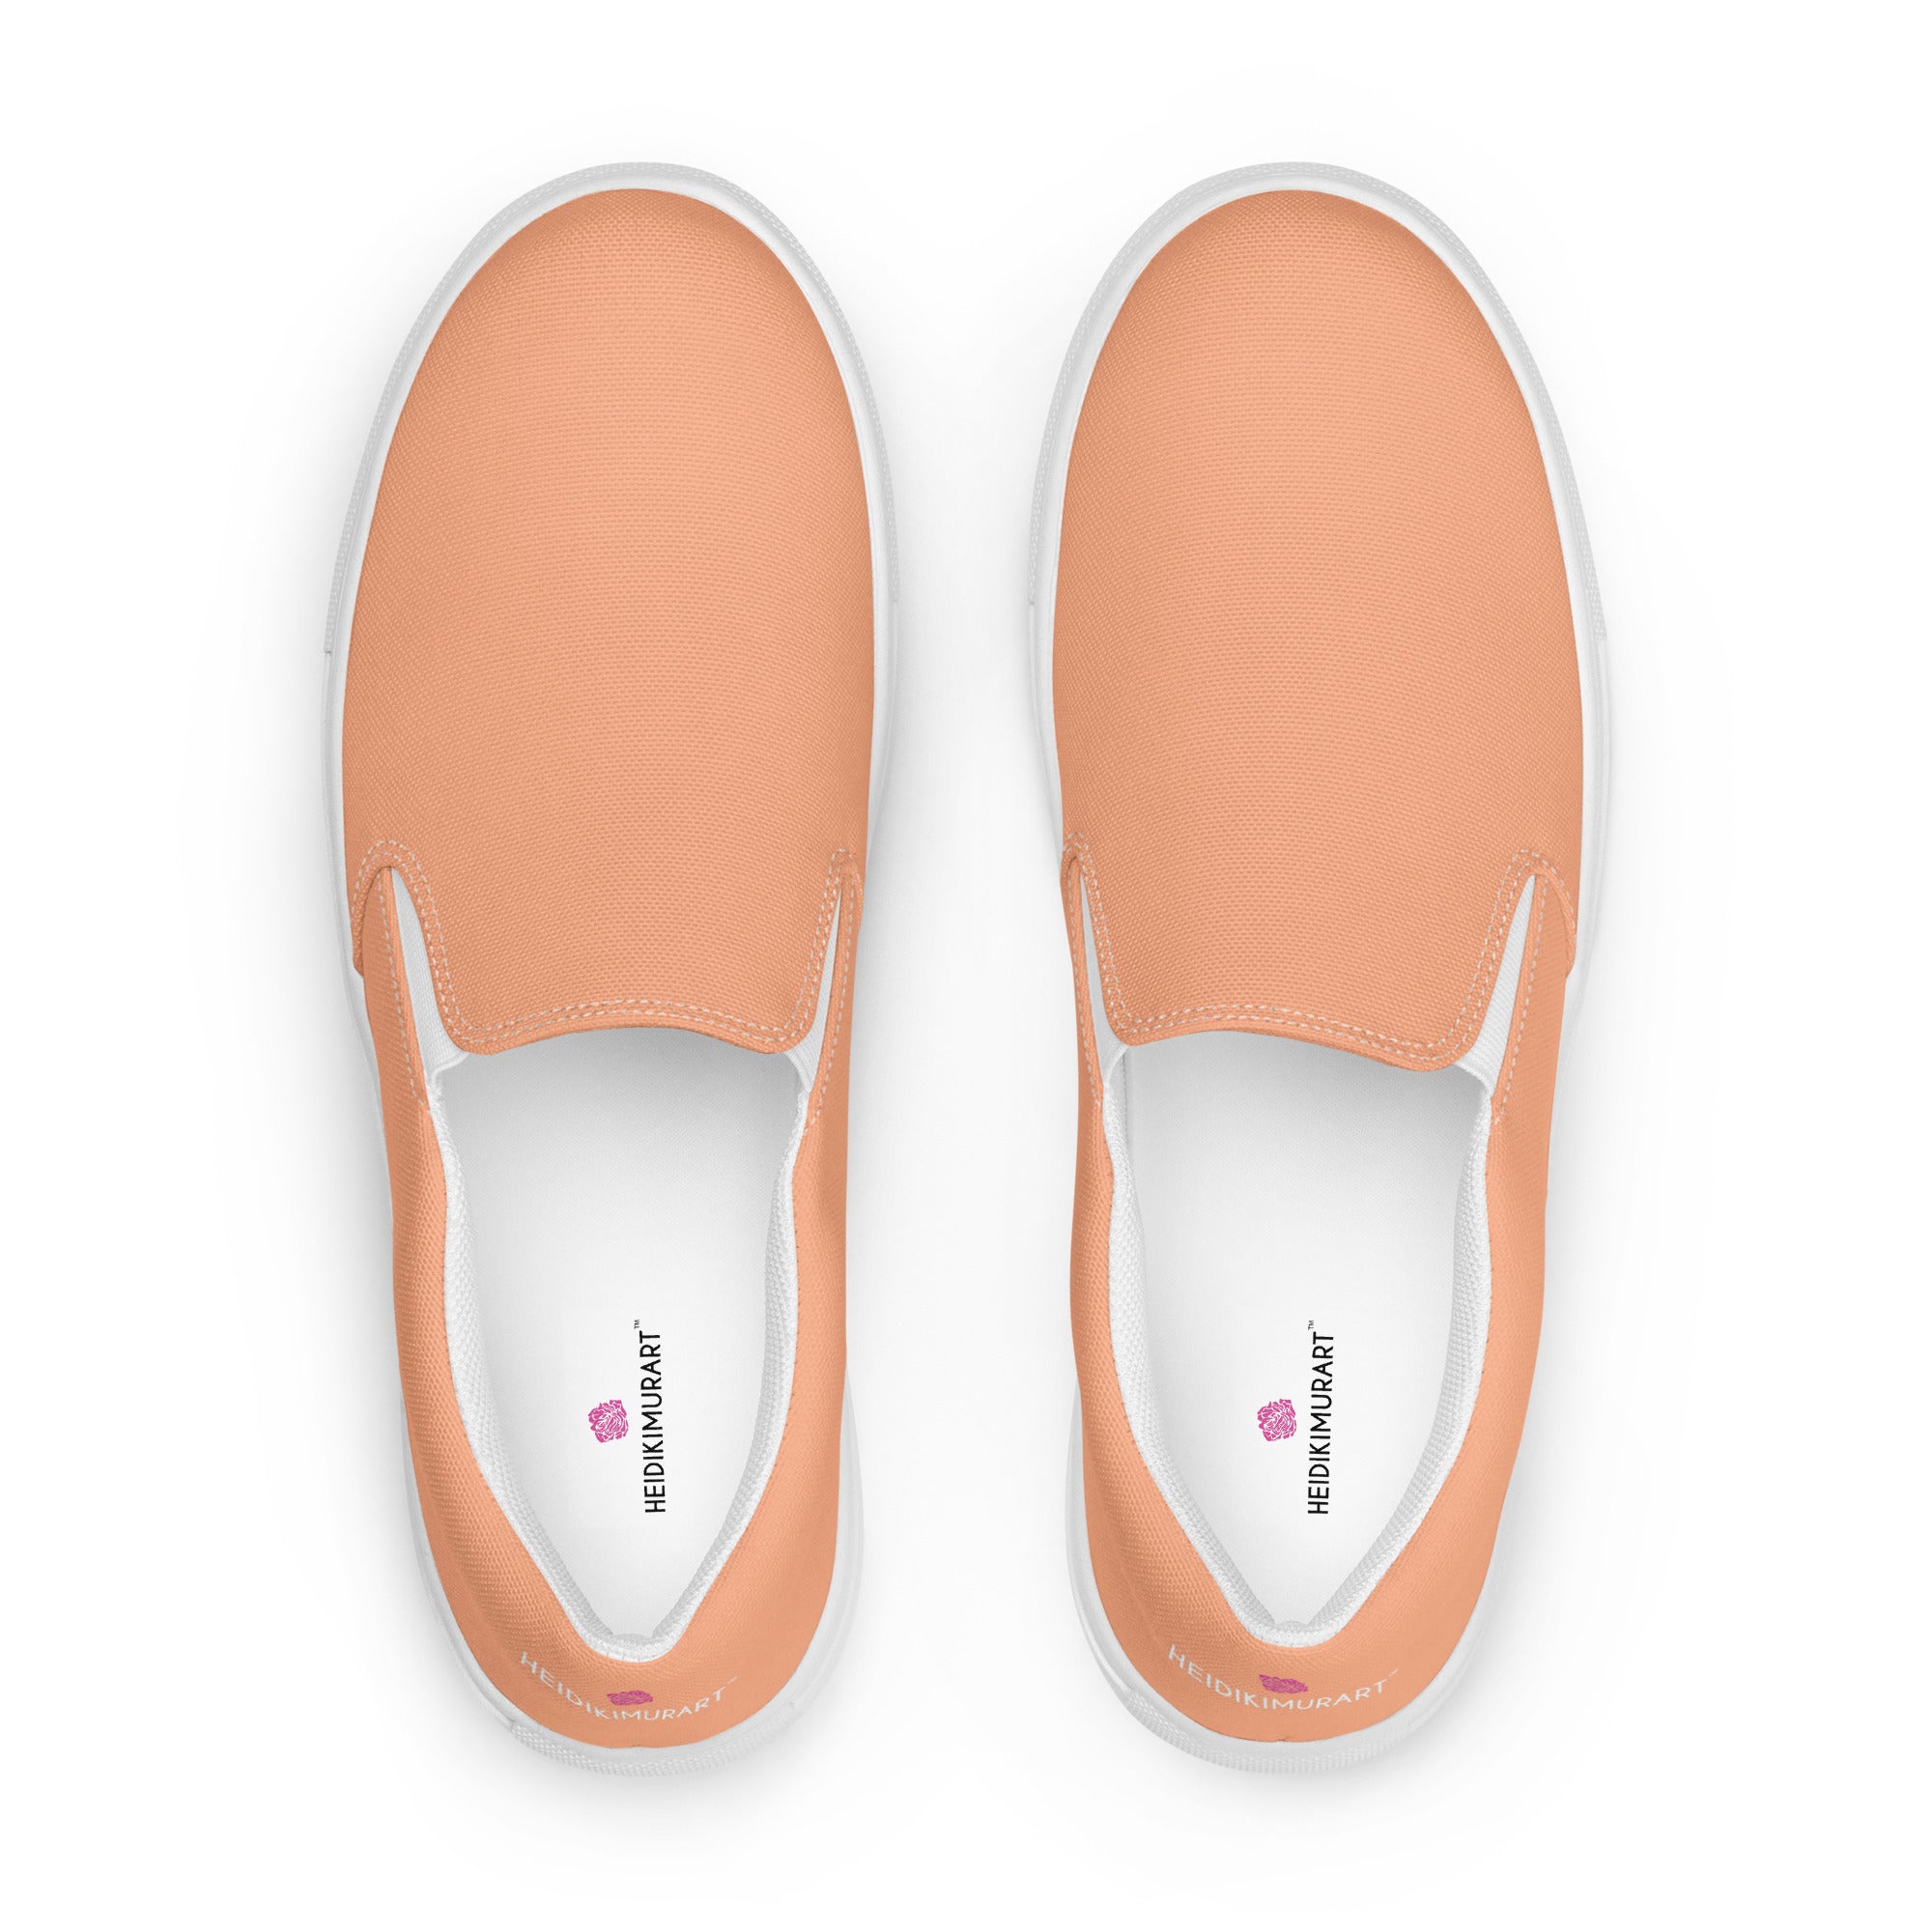 Nude Color Women's Slip Ons, Solid Colorful Nude Pink Color Modern Classic Modern Minimalist Women’s Premium High Quality Luxury Style Slip-On Canvas Shoes (US Size: 5-12) Women's Solid Color Casual Shoes, Slip-On Padded Breathable Loafer Shoes Footwear